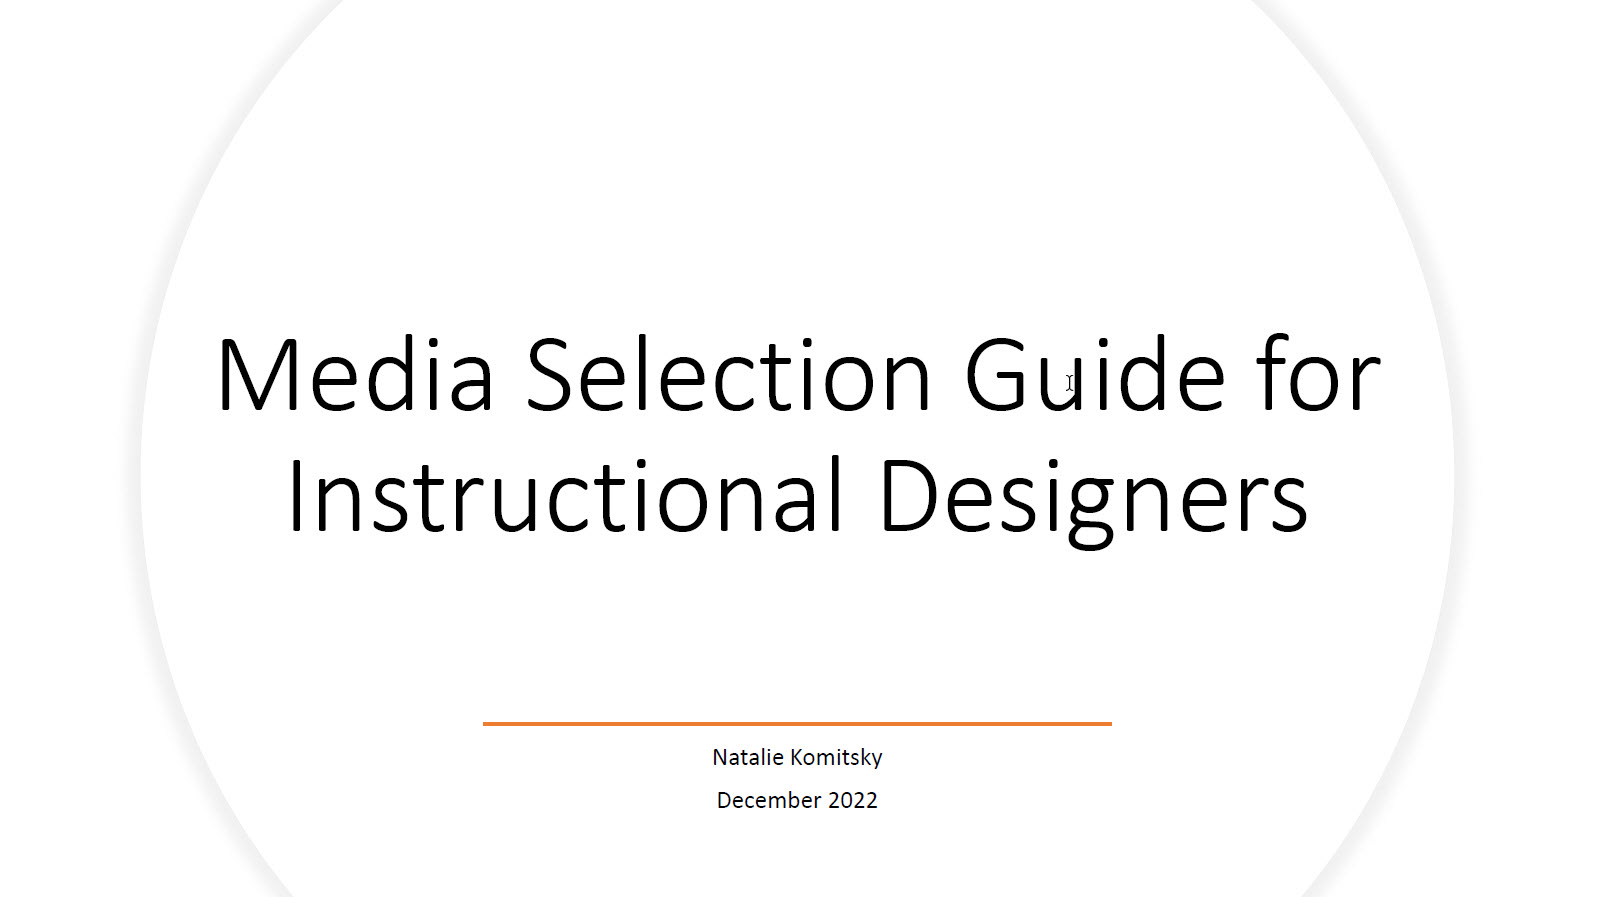 Media Selection Guide for Instructional Designers